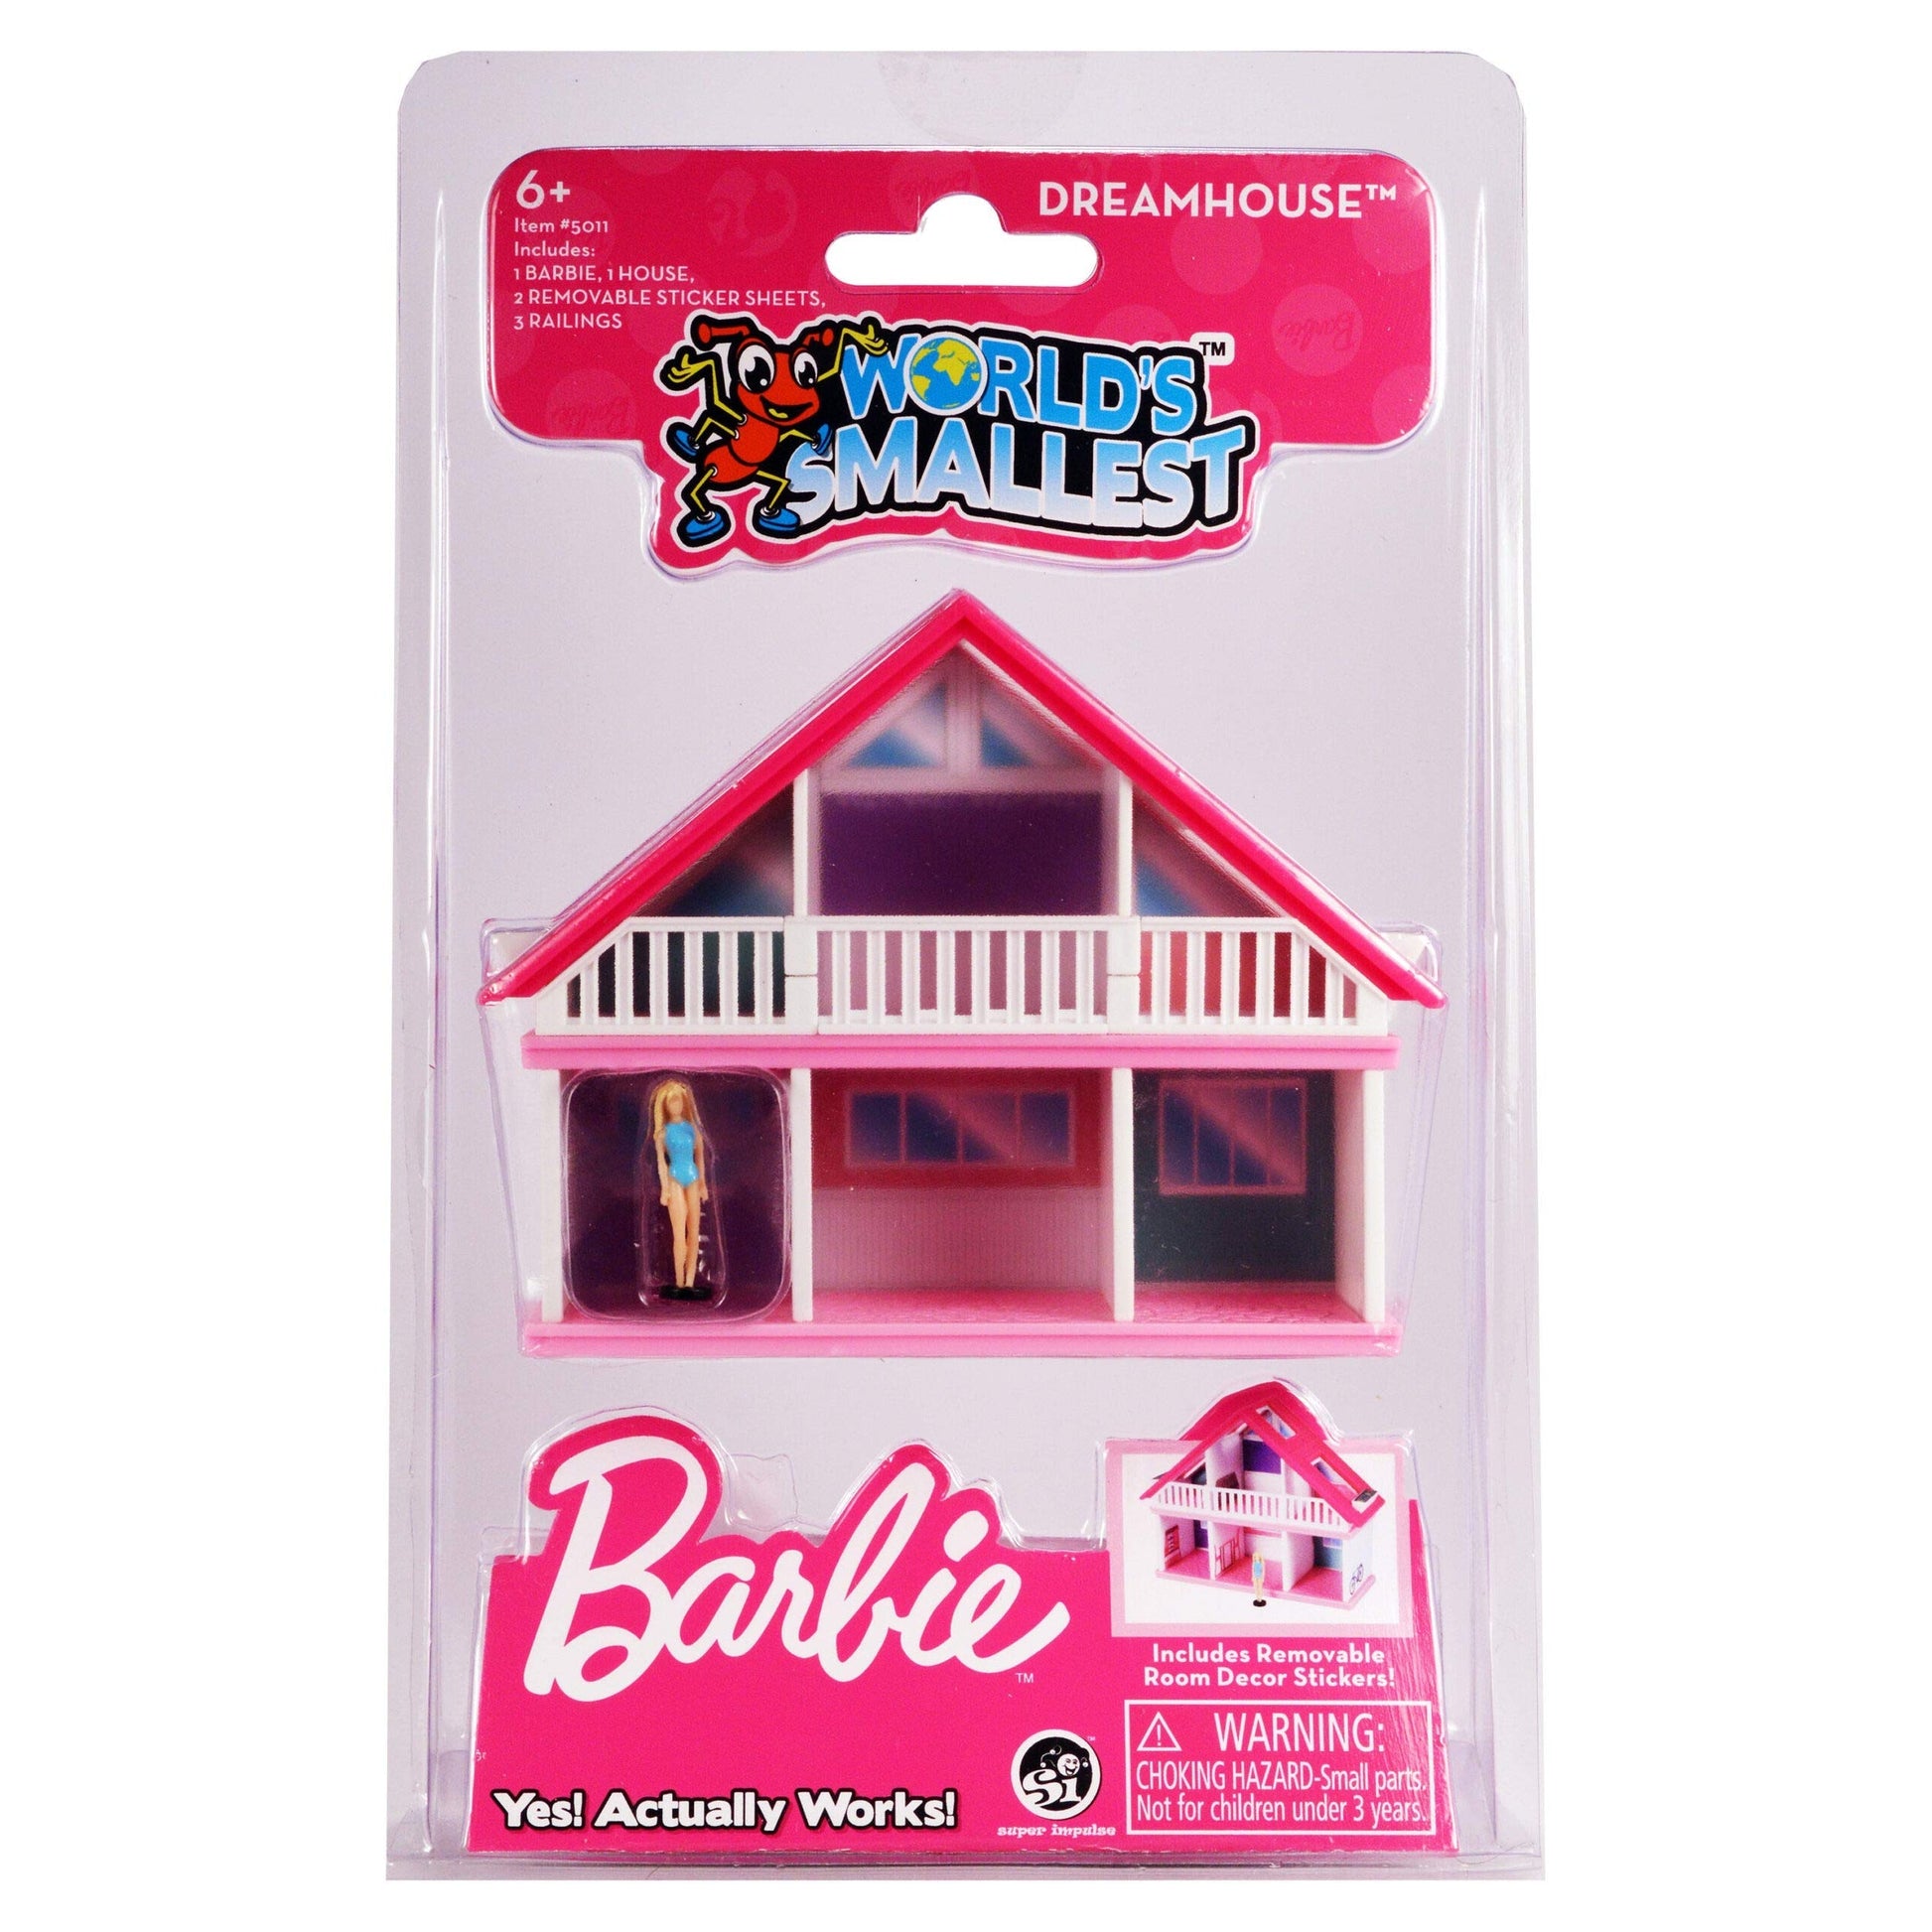 Worlds Smallest - Barbie - Dreamhouse-Yarrawonga Fun and Games